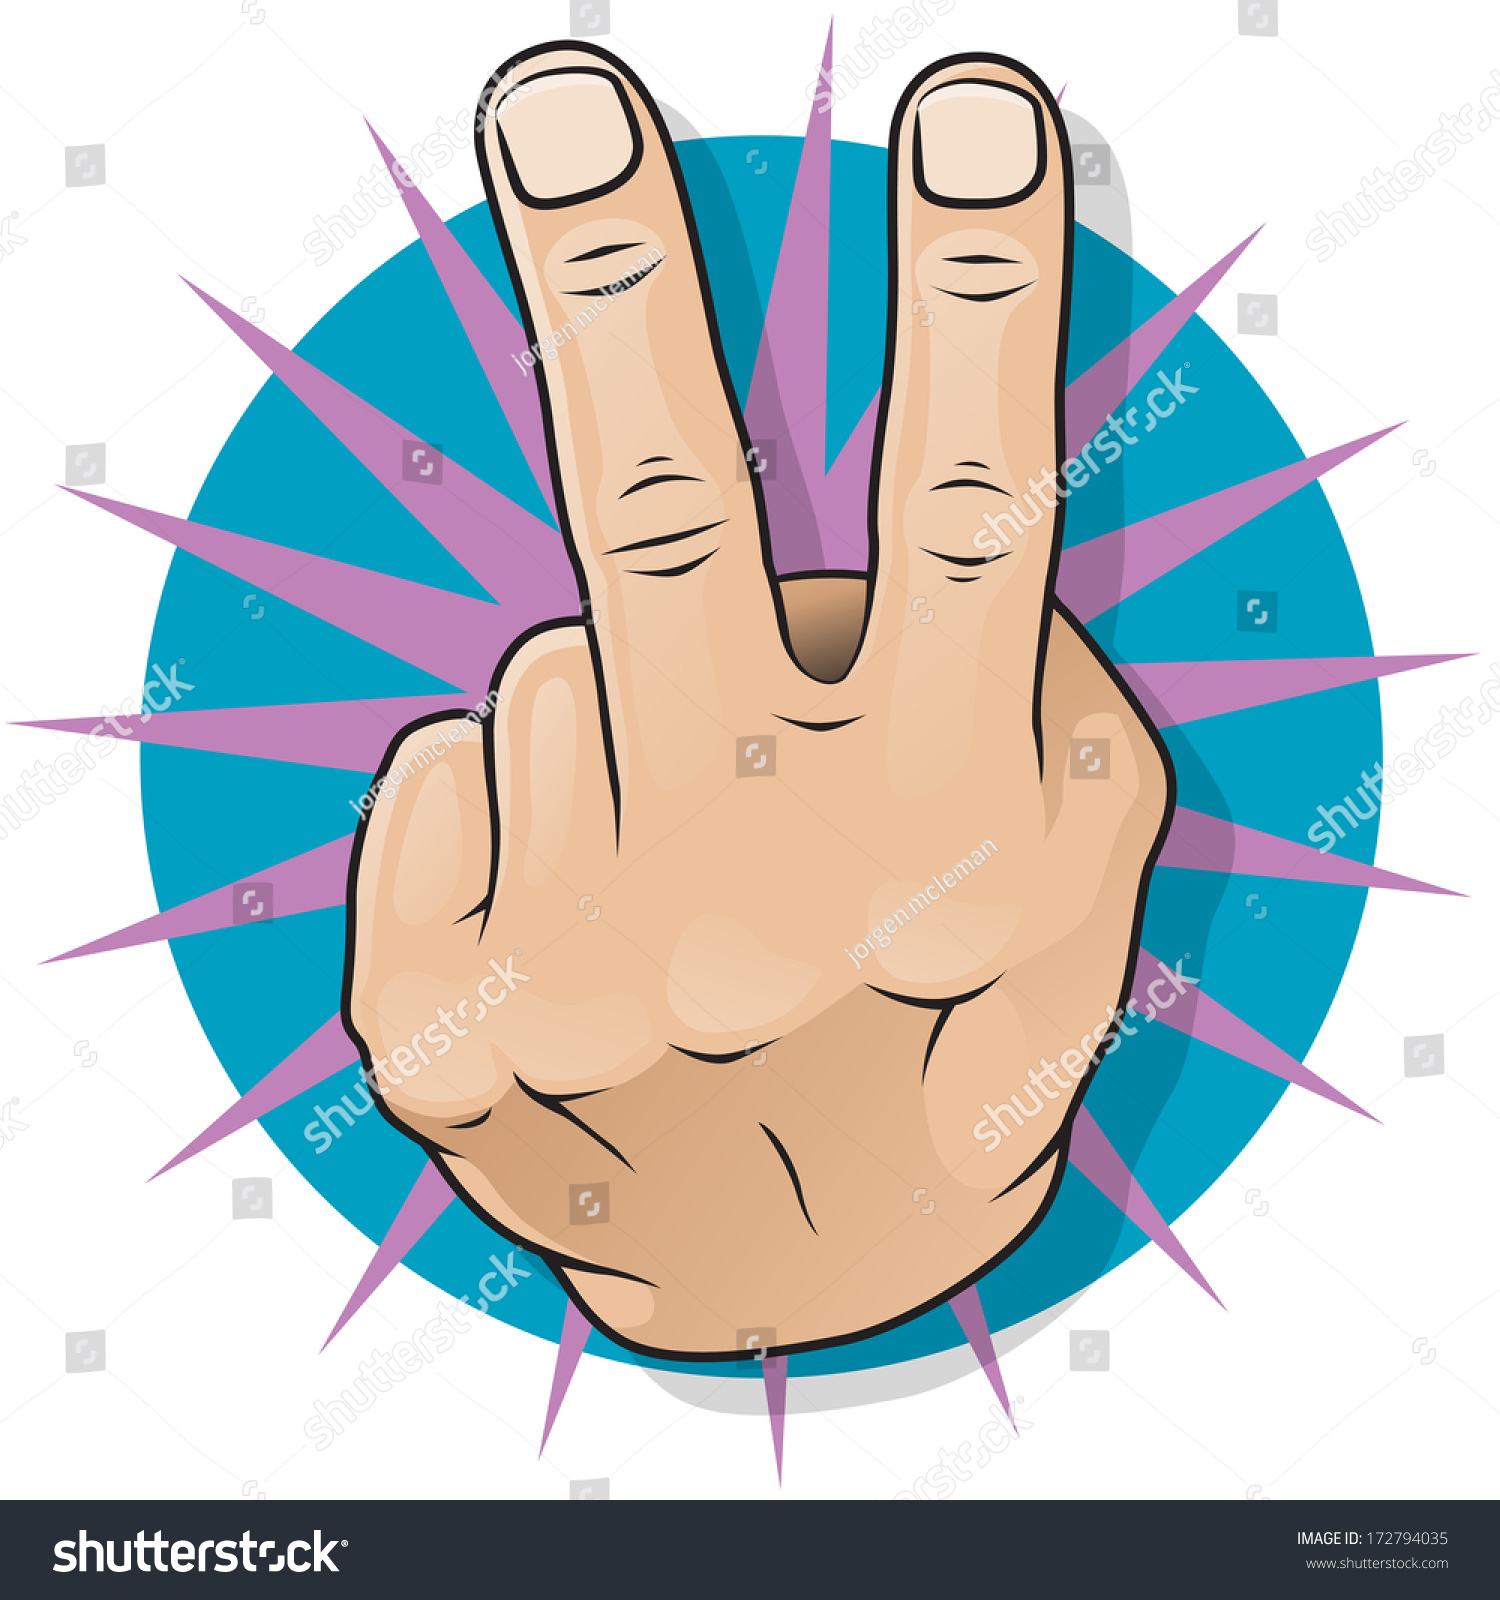 stock-vector-vintage-pop-two-fingers-up-